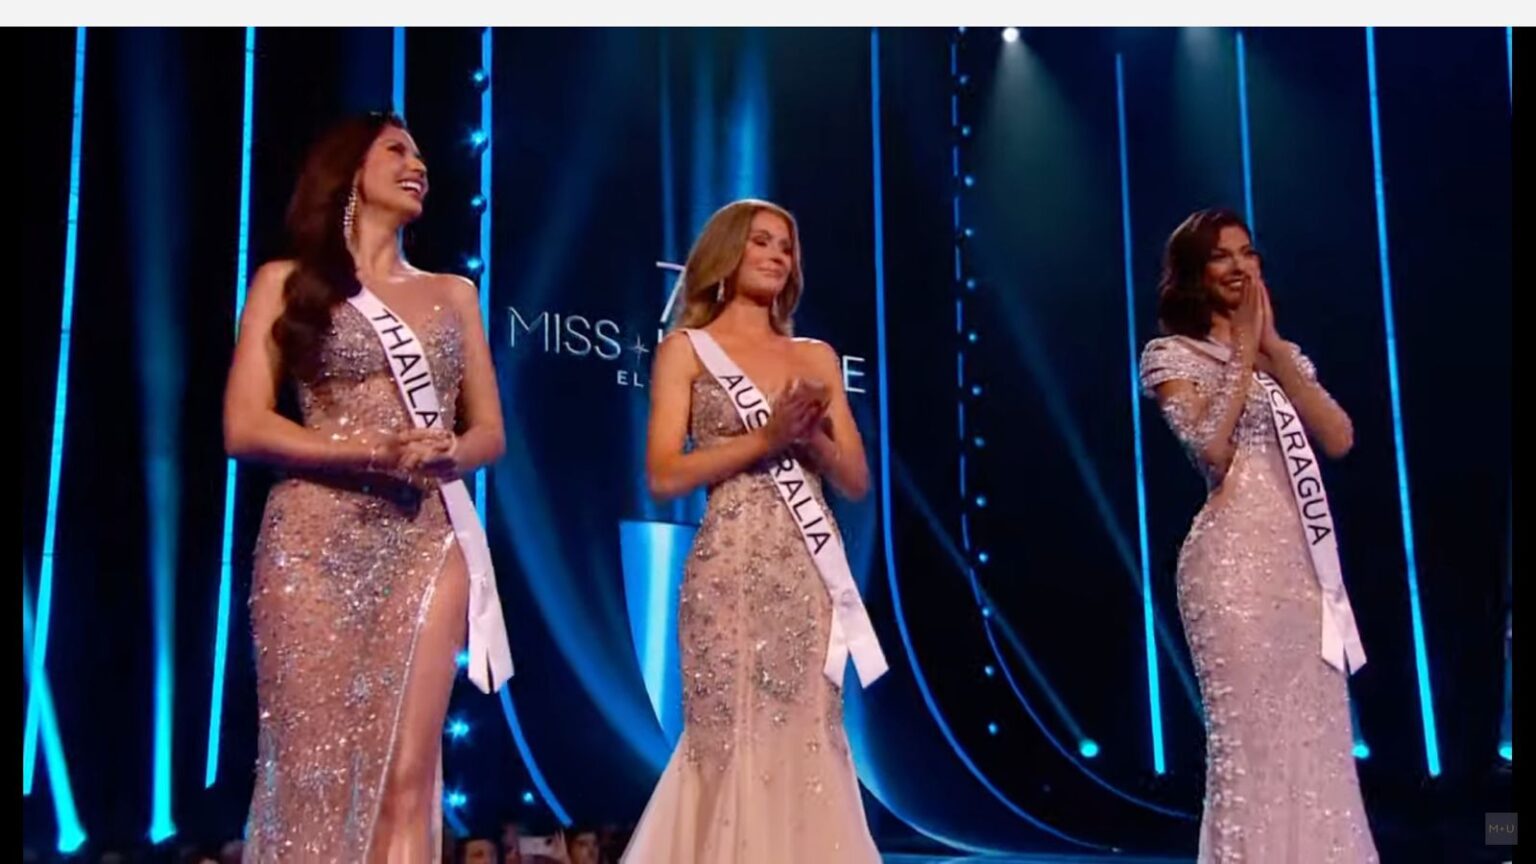 Thailand, Australia, Nicaragua are final 3 in Miss Universe 2023